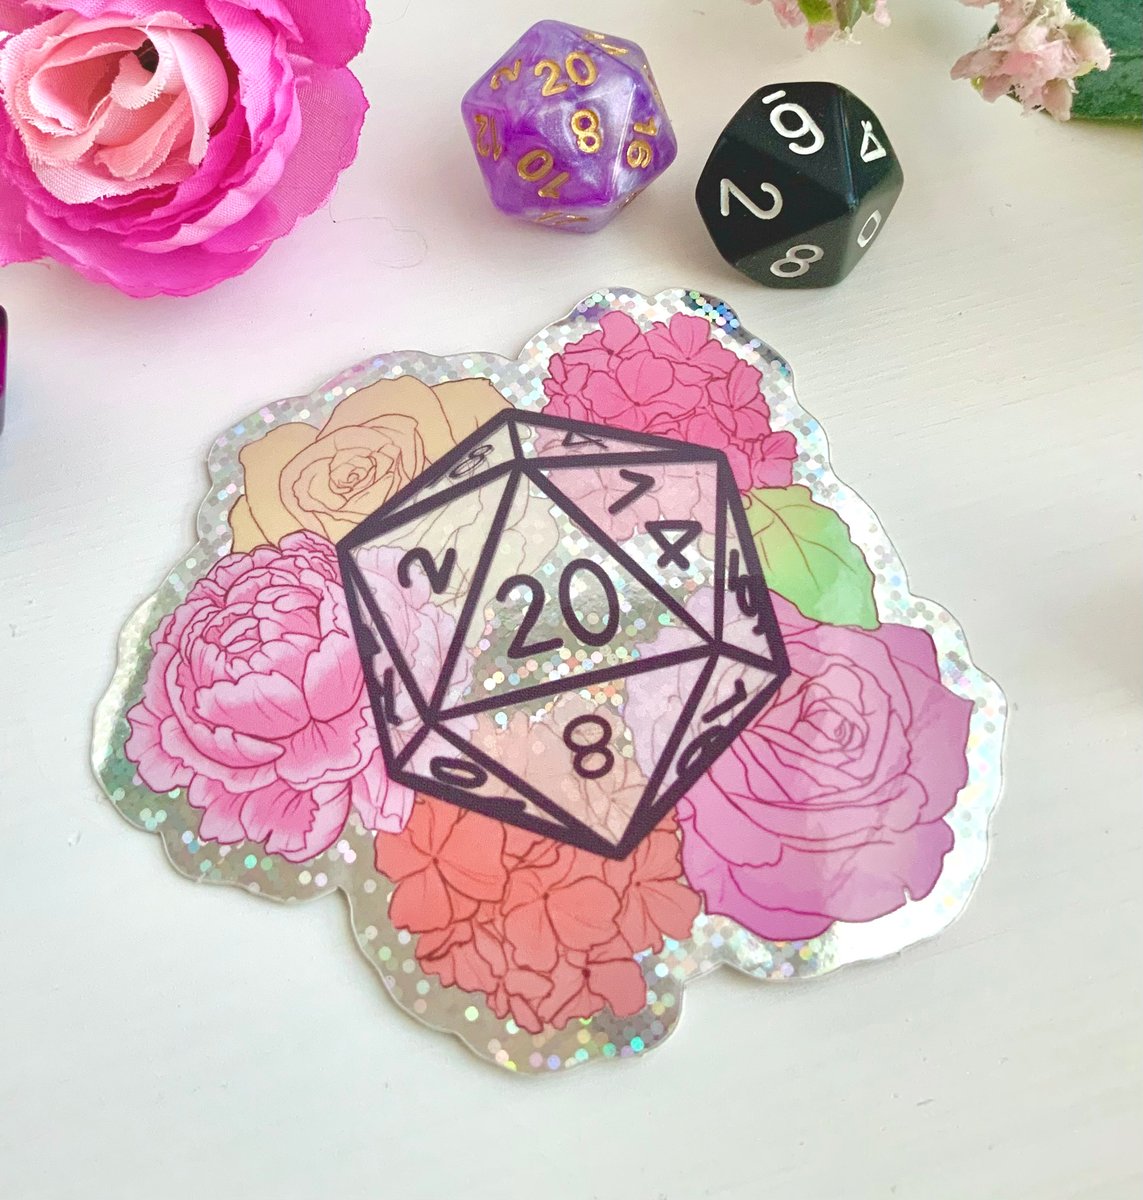 6 oz D20 Plastic Mold – The Crafts and Glitter Shop